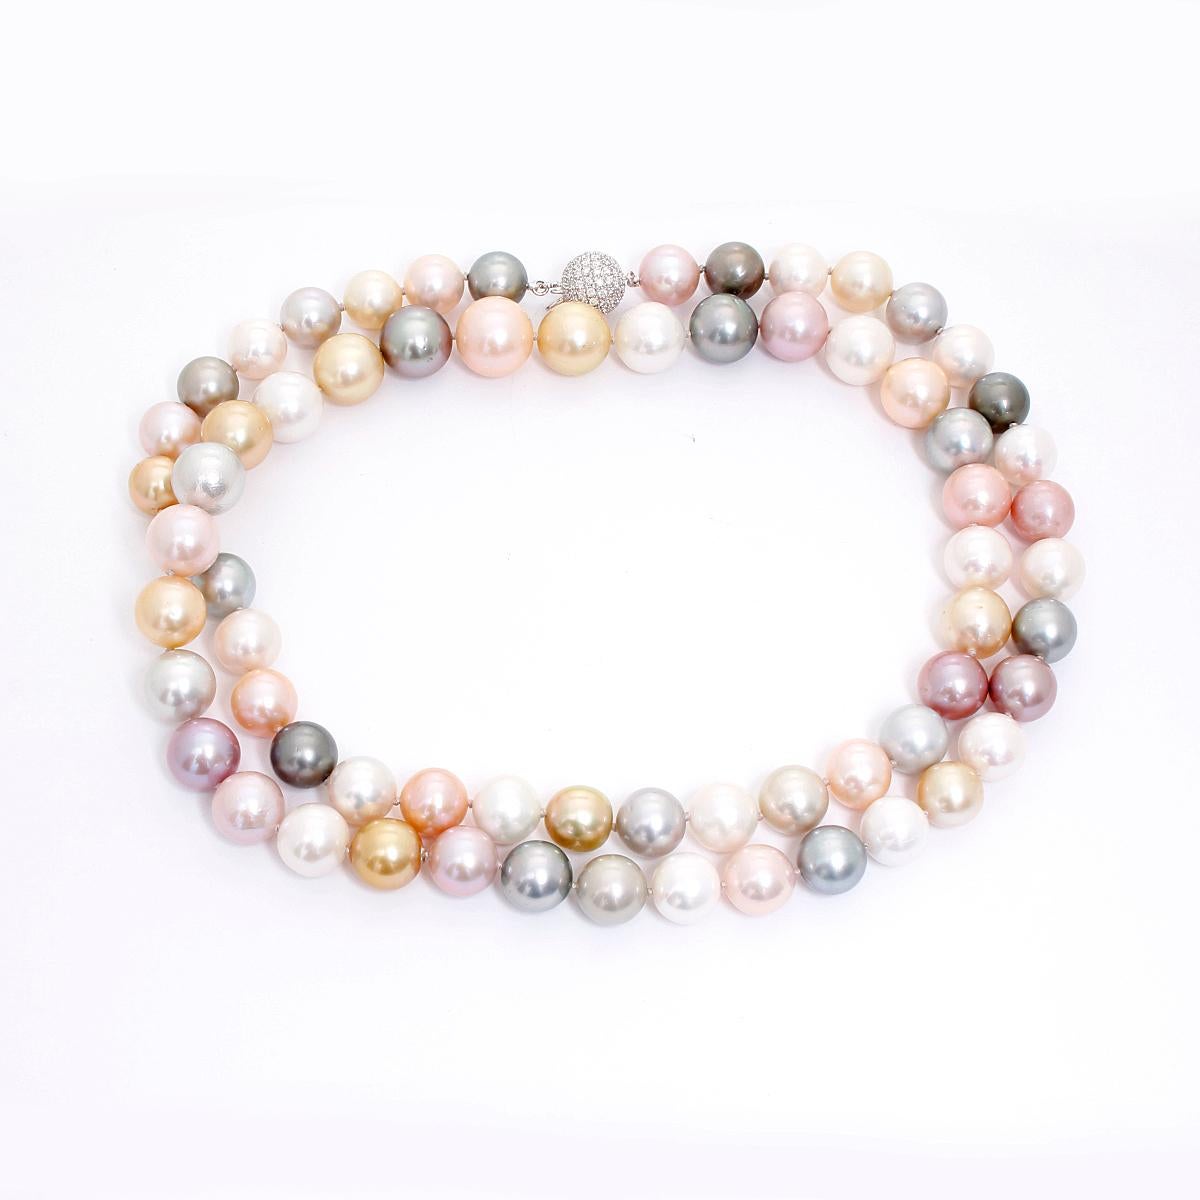 Women's South Sea Multi-Color Pearl Necklace with Diamond Clasp